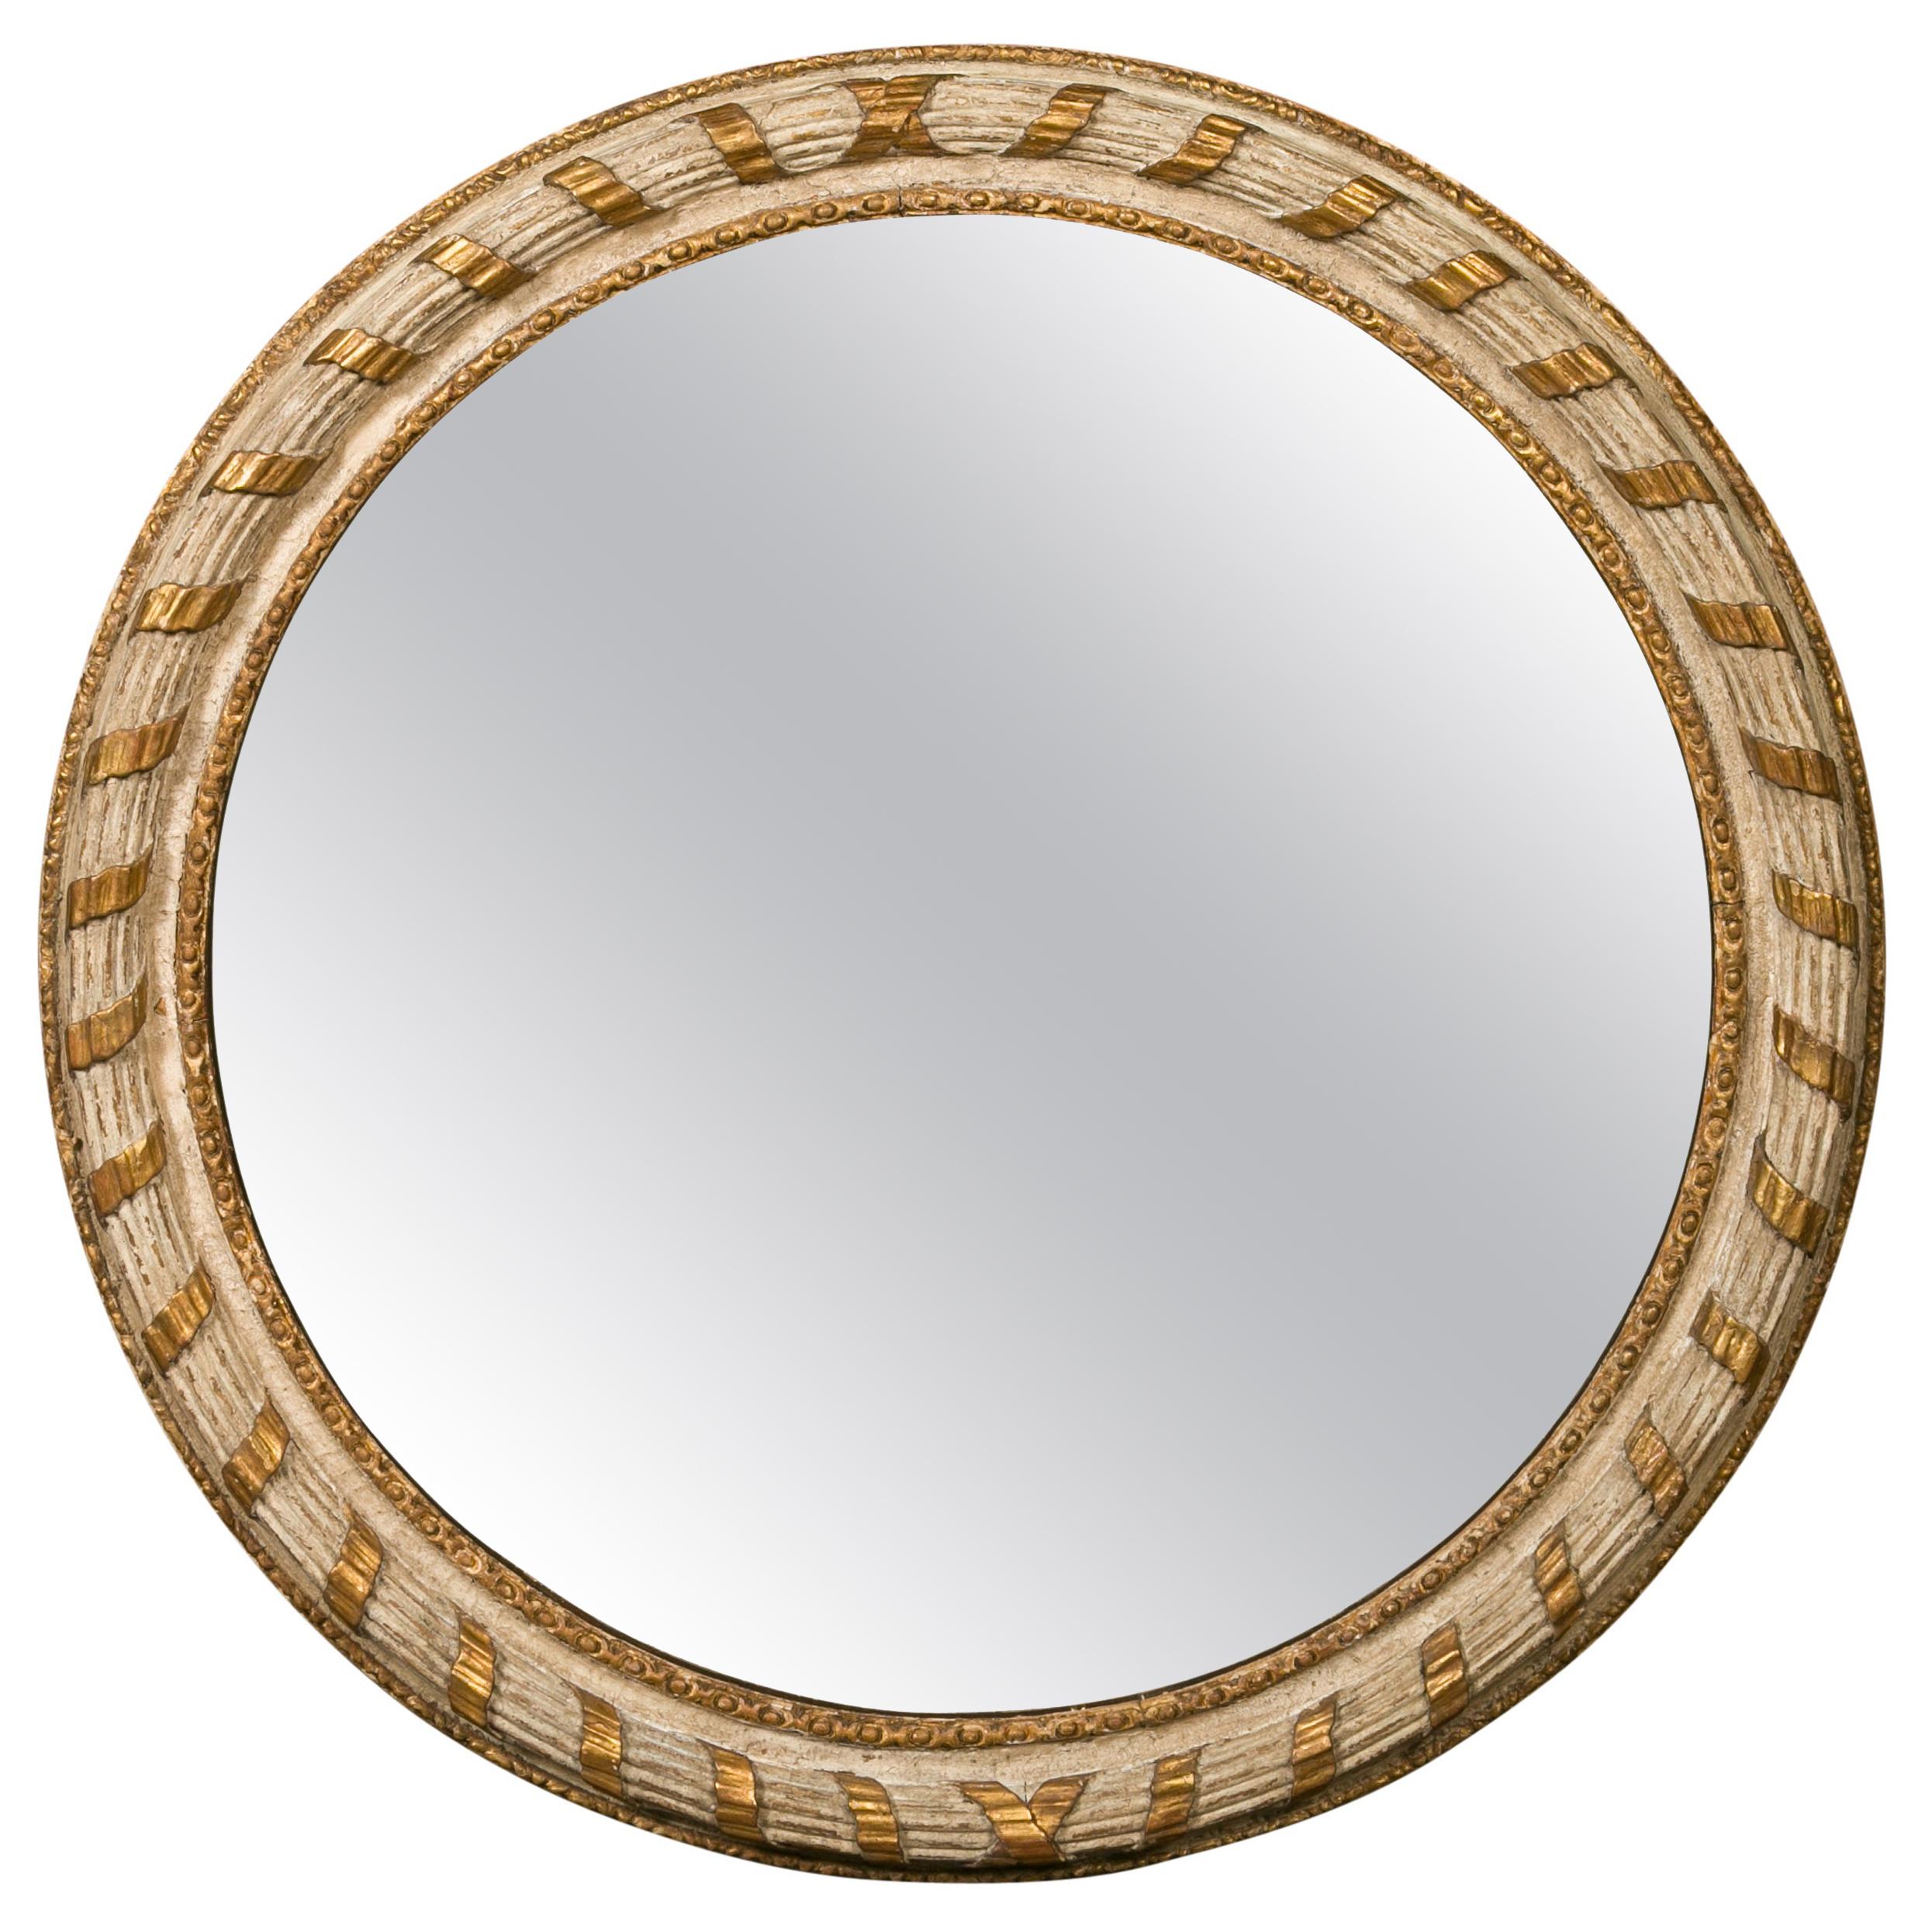 Italian 1880s Parcel-Gilt and Painted Circular Mirror with Carved Ribbon